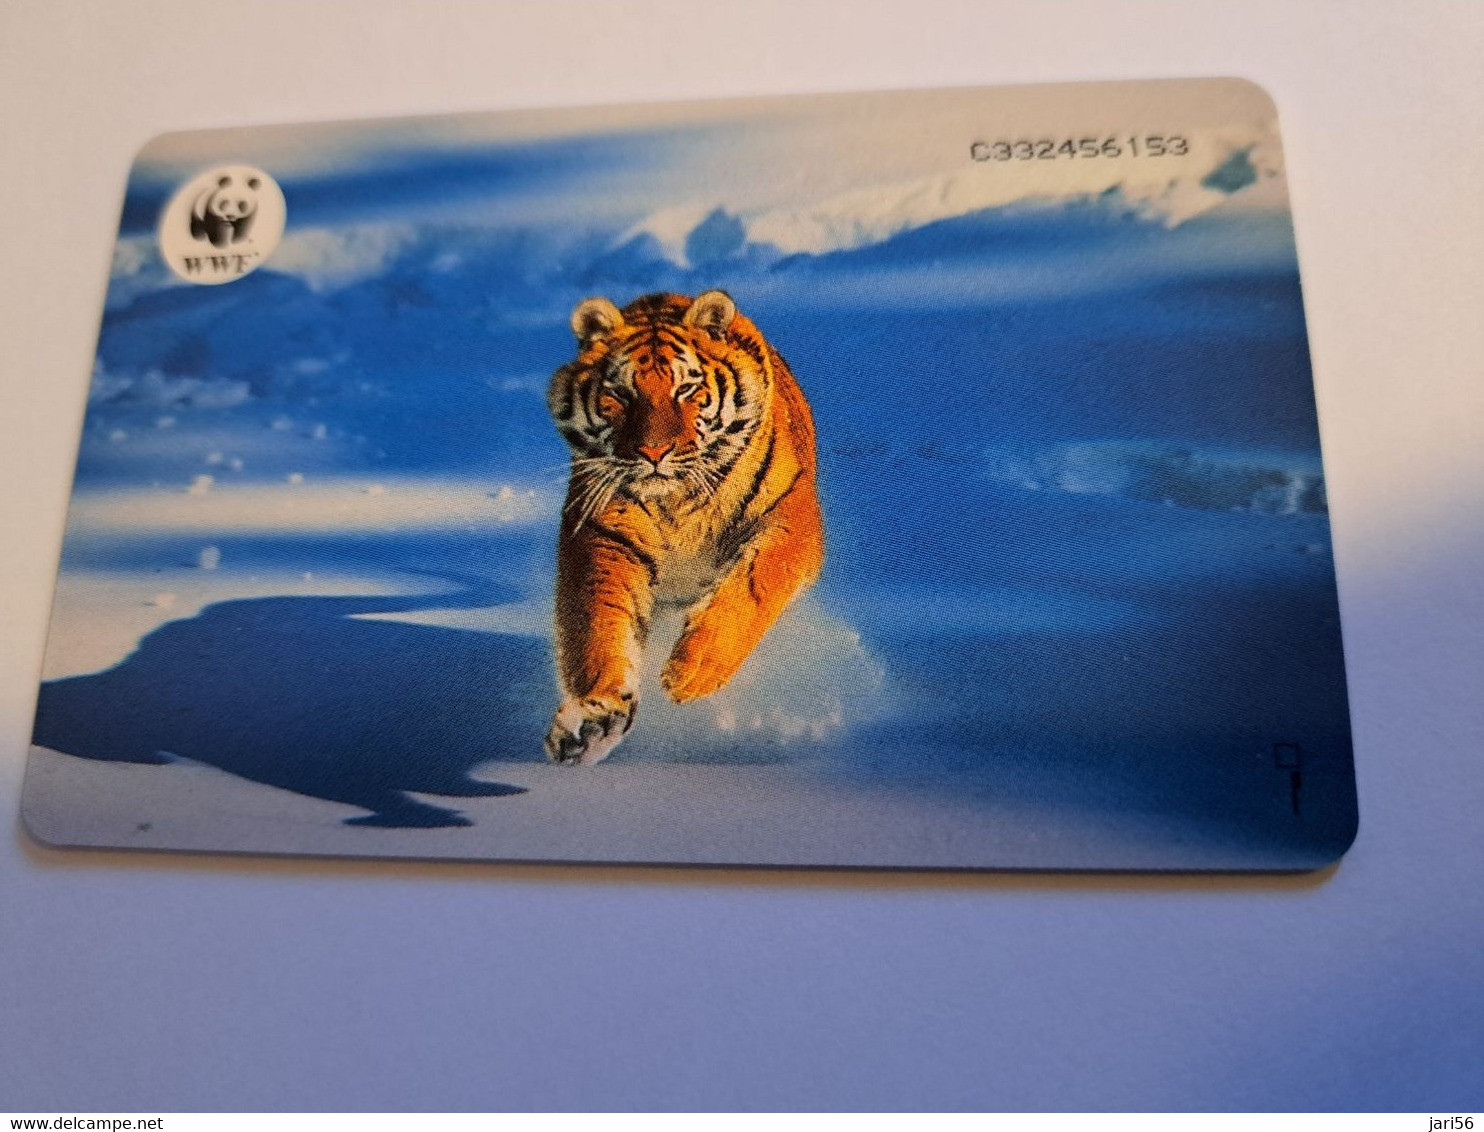 NETHERLANDS / WWF/WNF 1x TIGER/TIGRE  / CHIP ADVERTISING /DIFFICULT /  HFL 2,50 /CRD 531.01  MINT !!  ** 11987** - Private